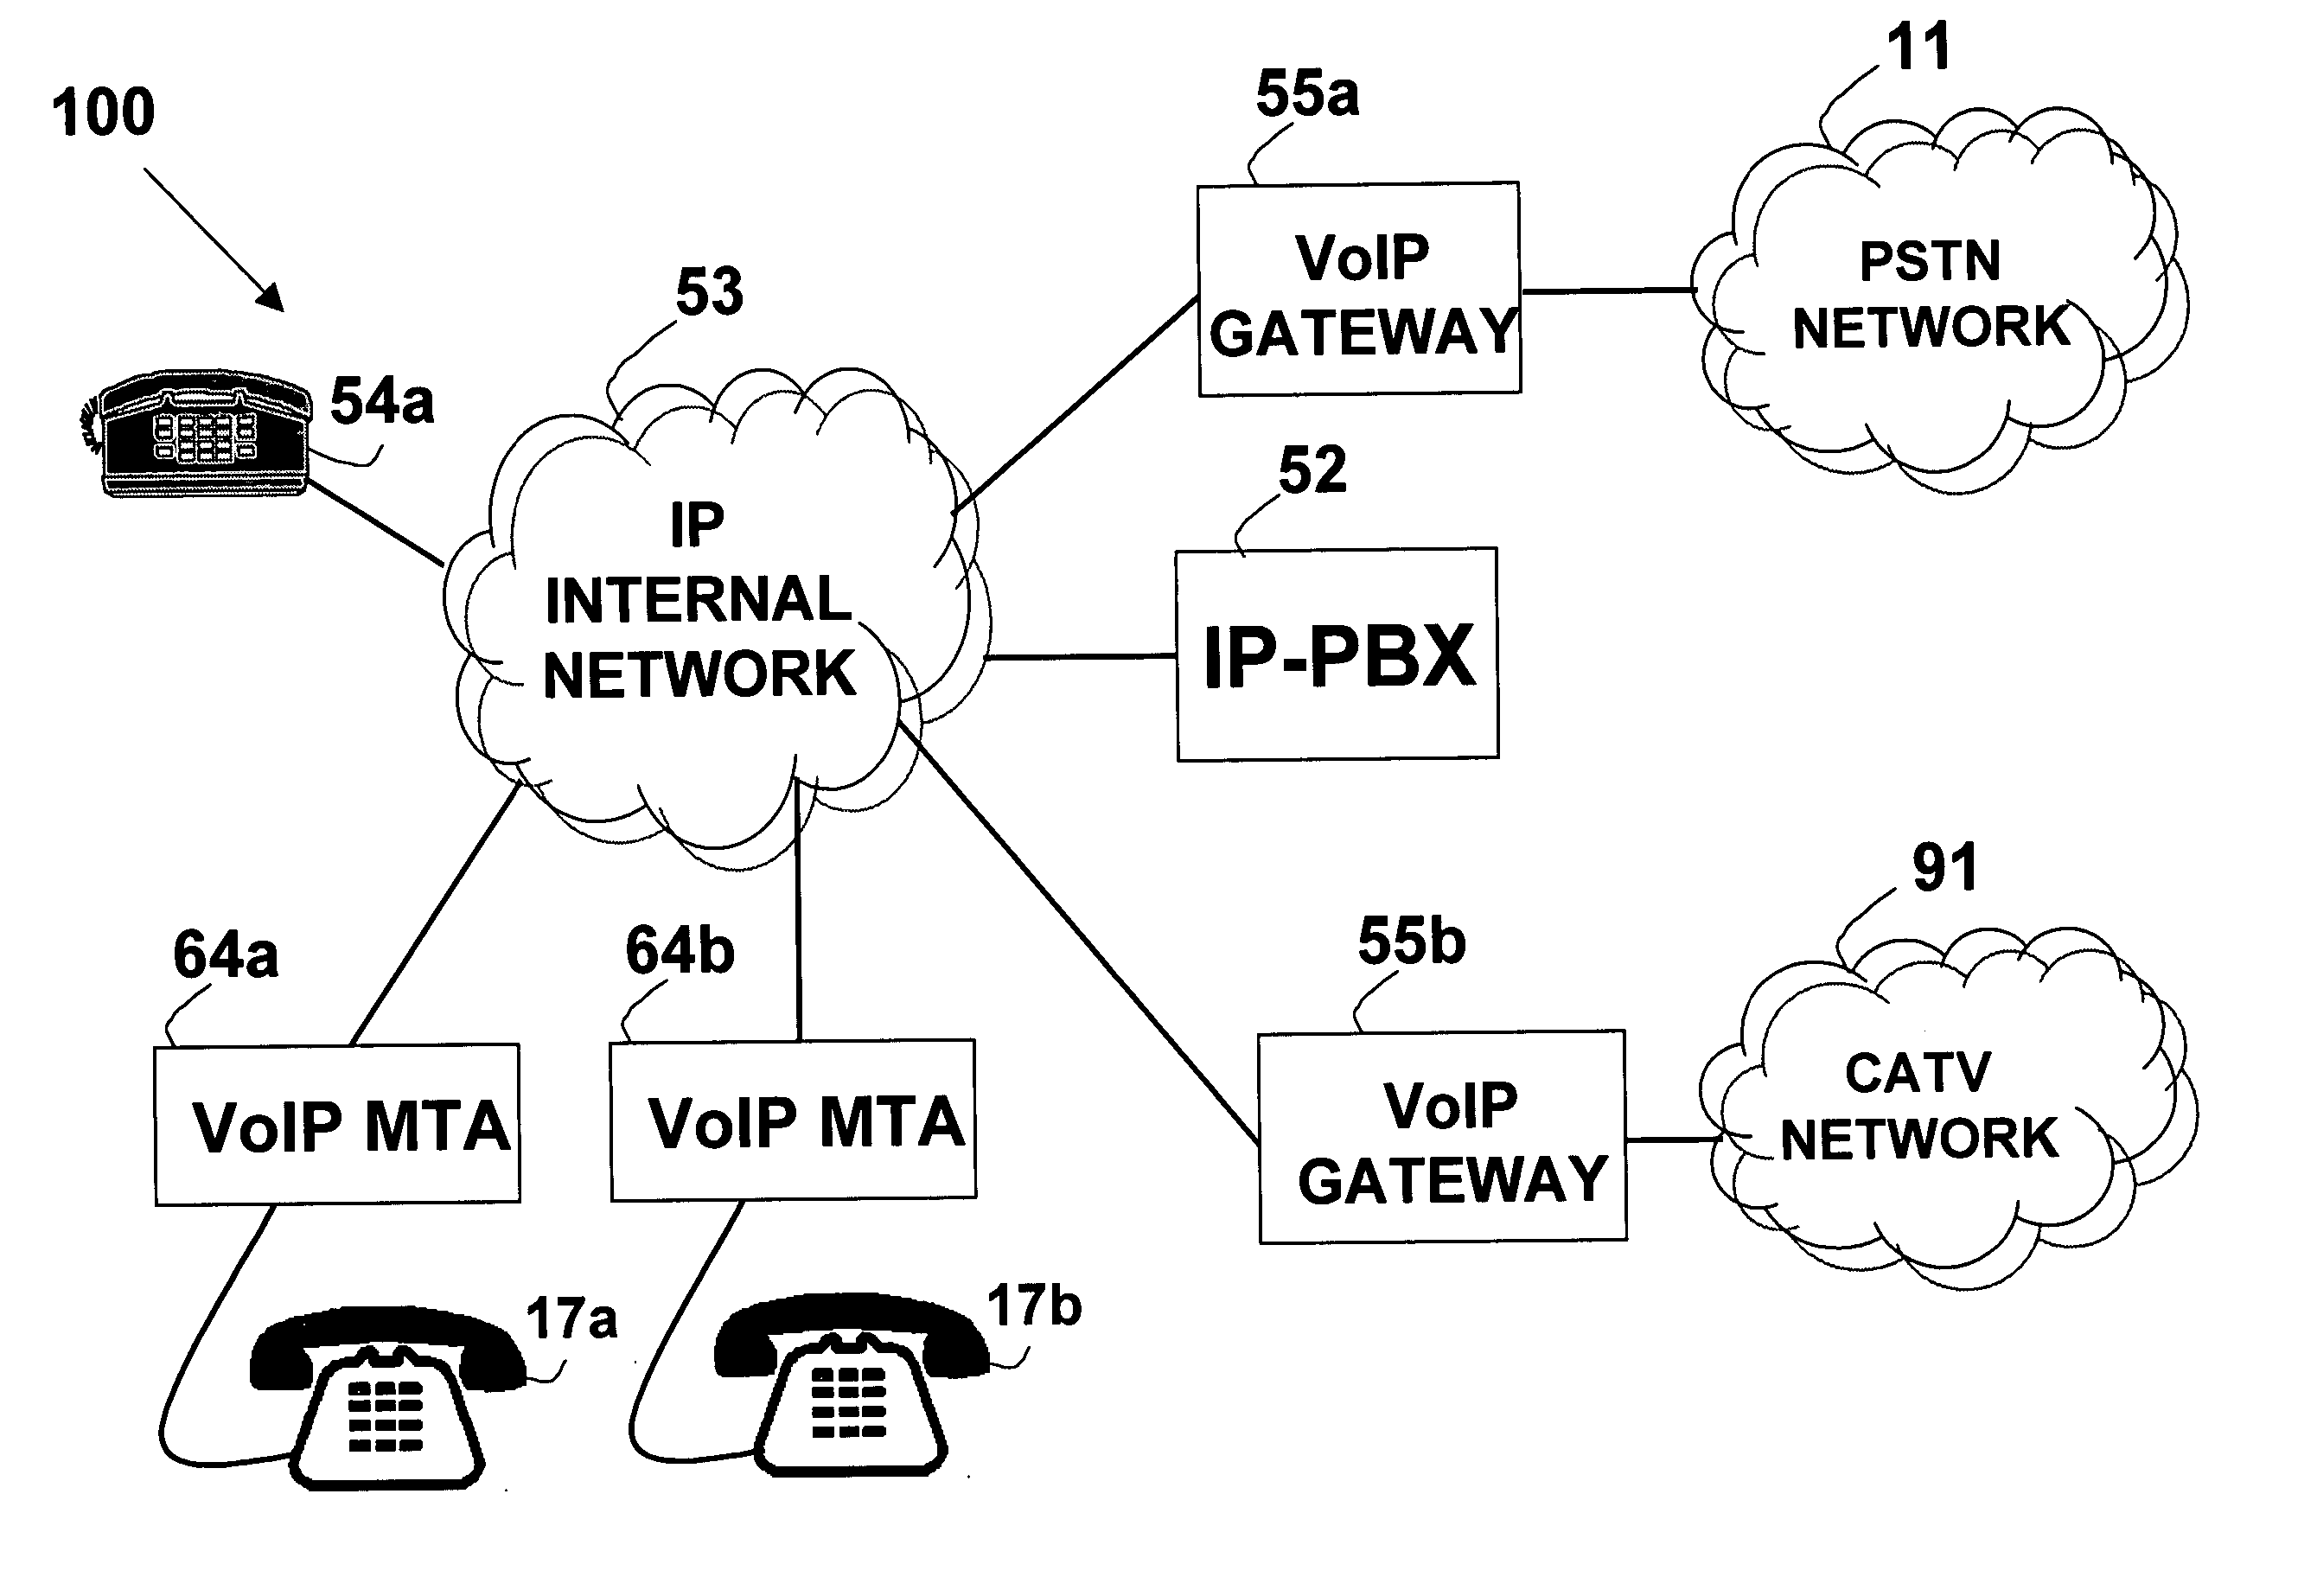 Private telephone network connected to more than one public network